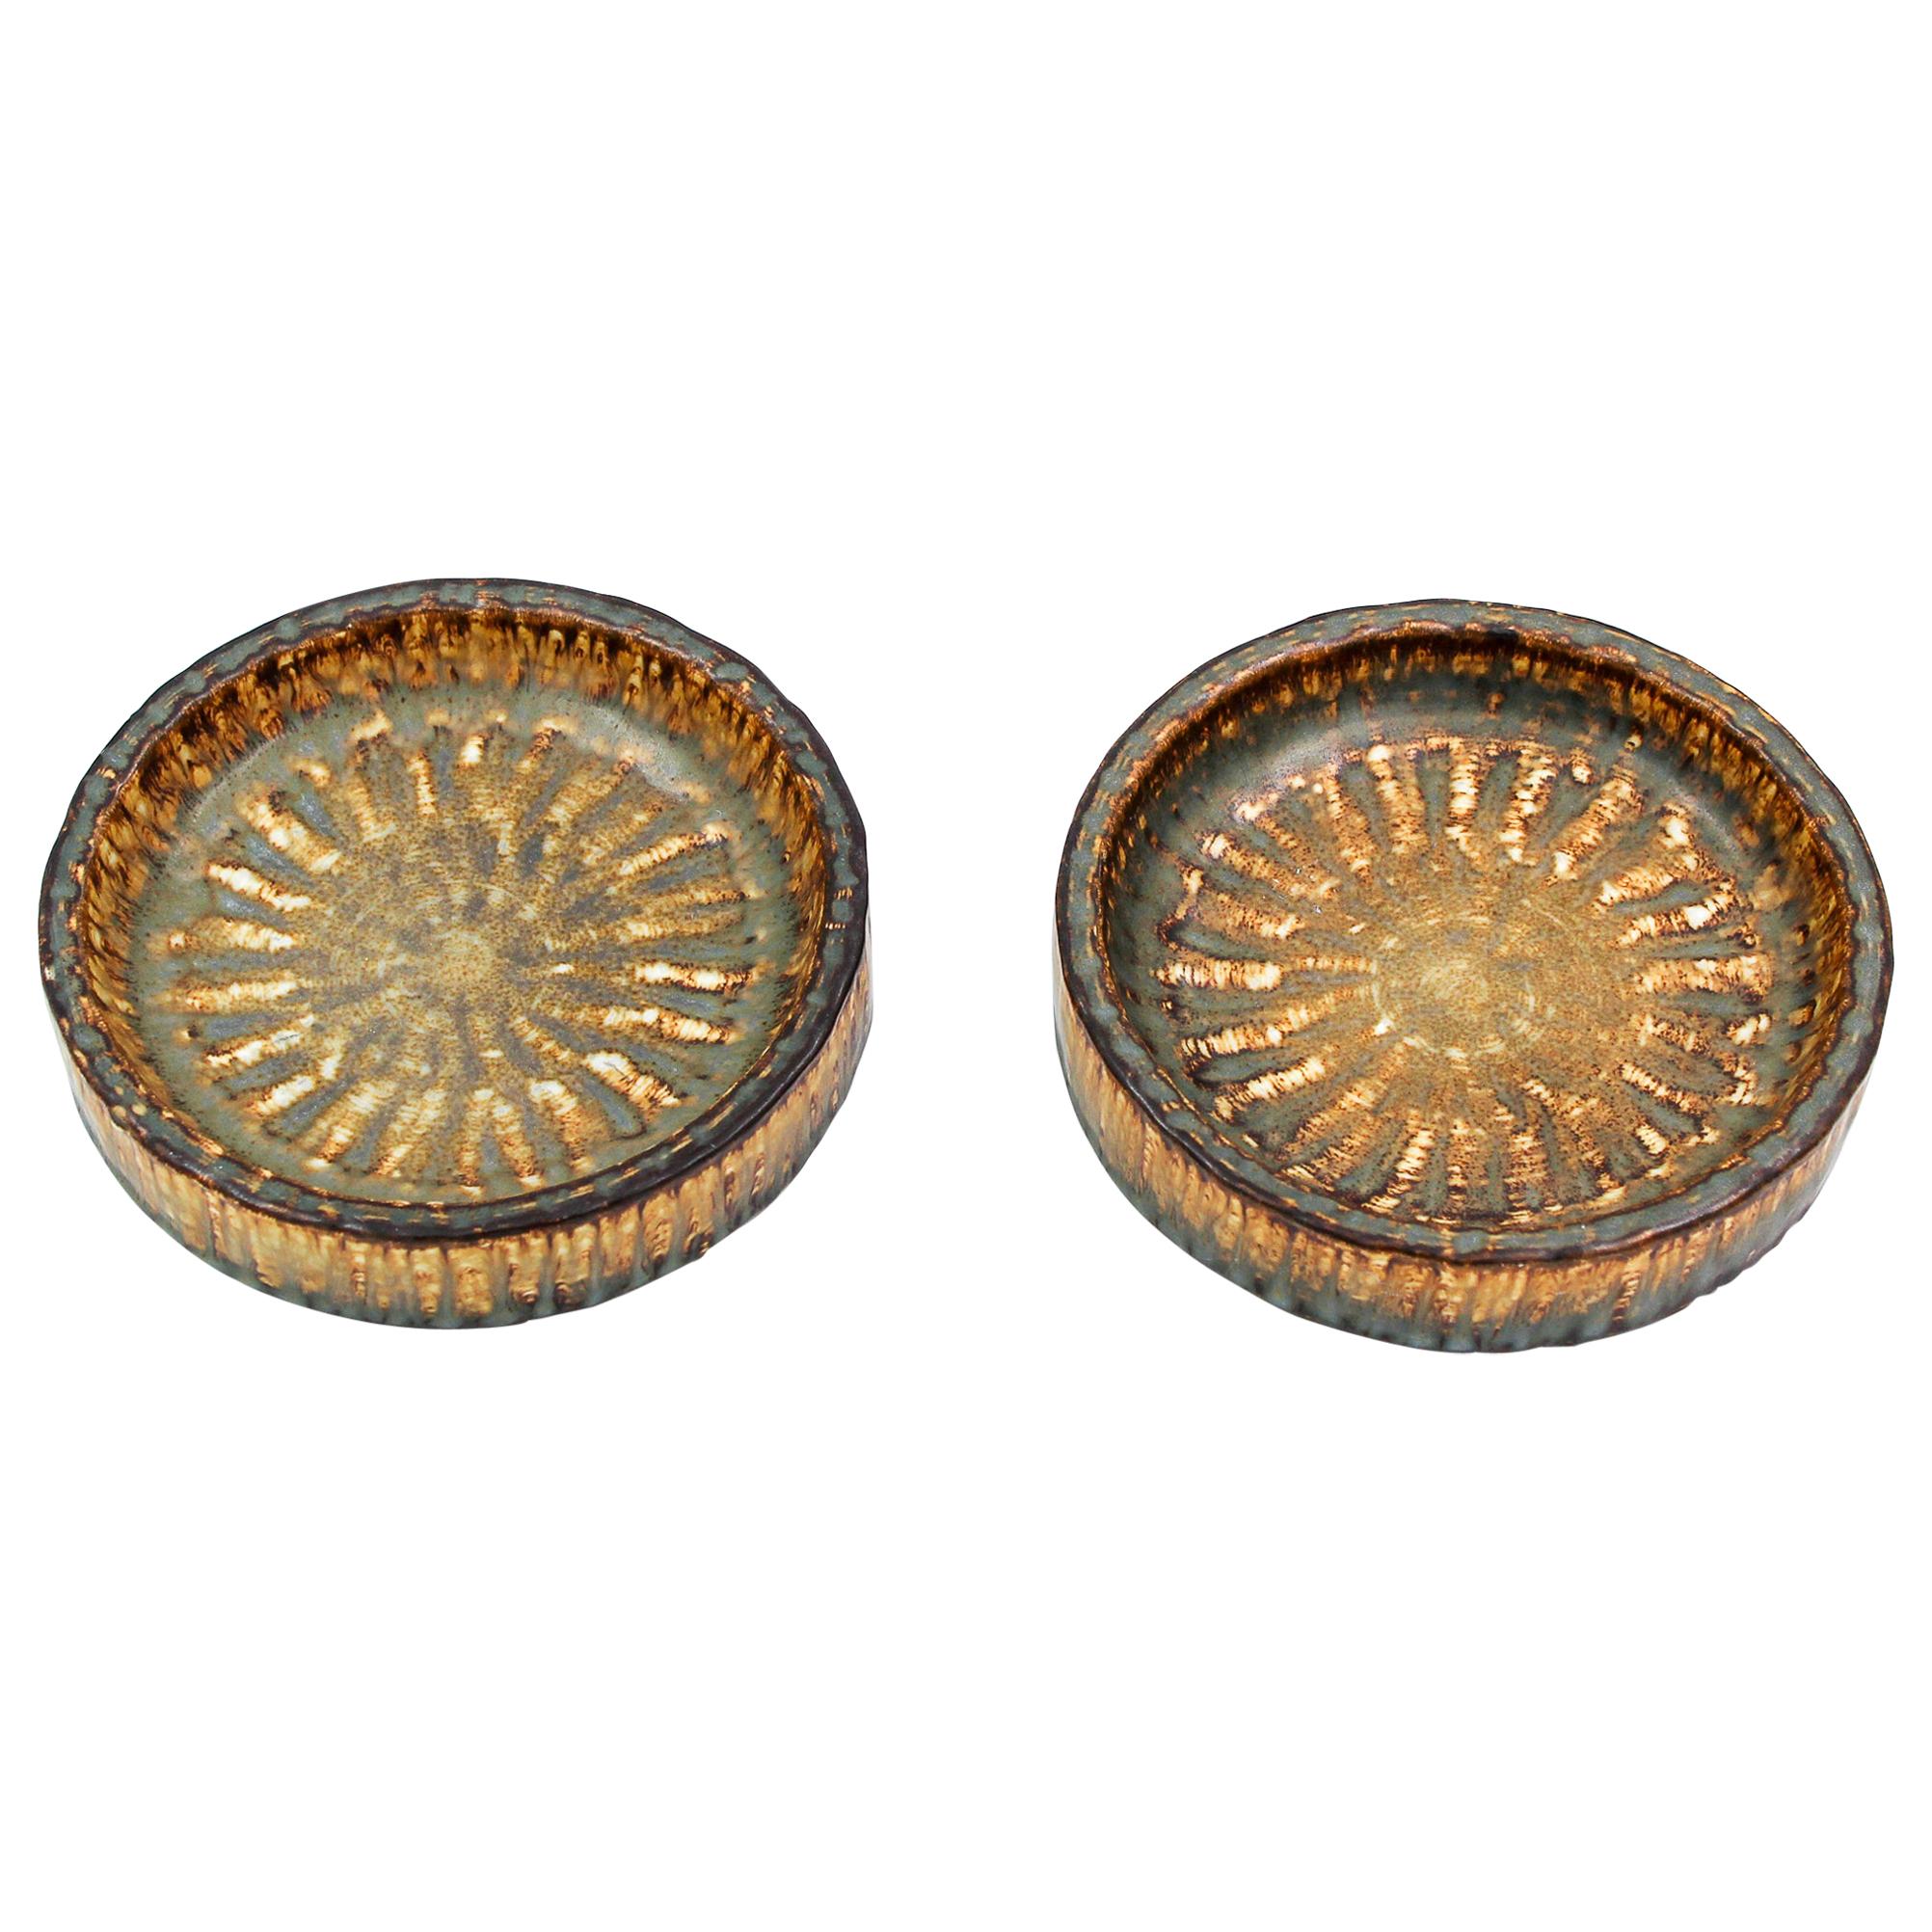 Pair of Midcentury Ceramic Bowls by Gunnar Nylund for Rörstrand, 1950s For Sale